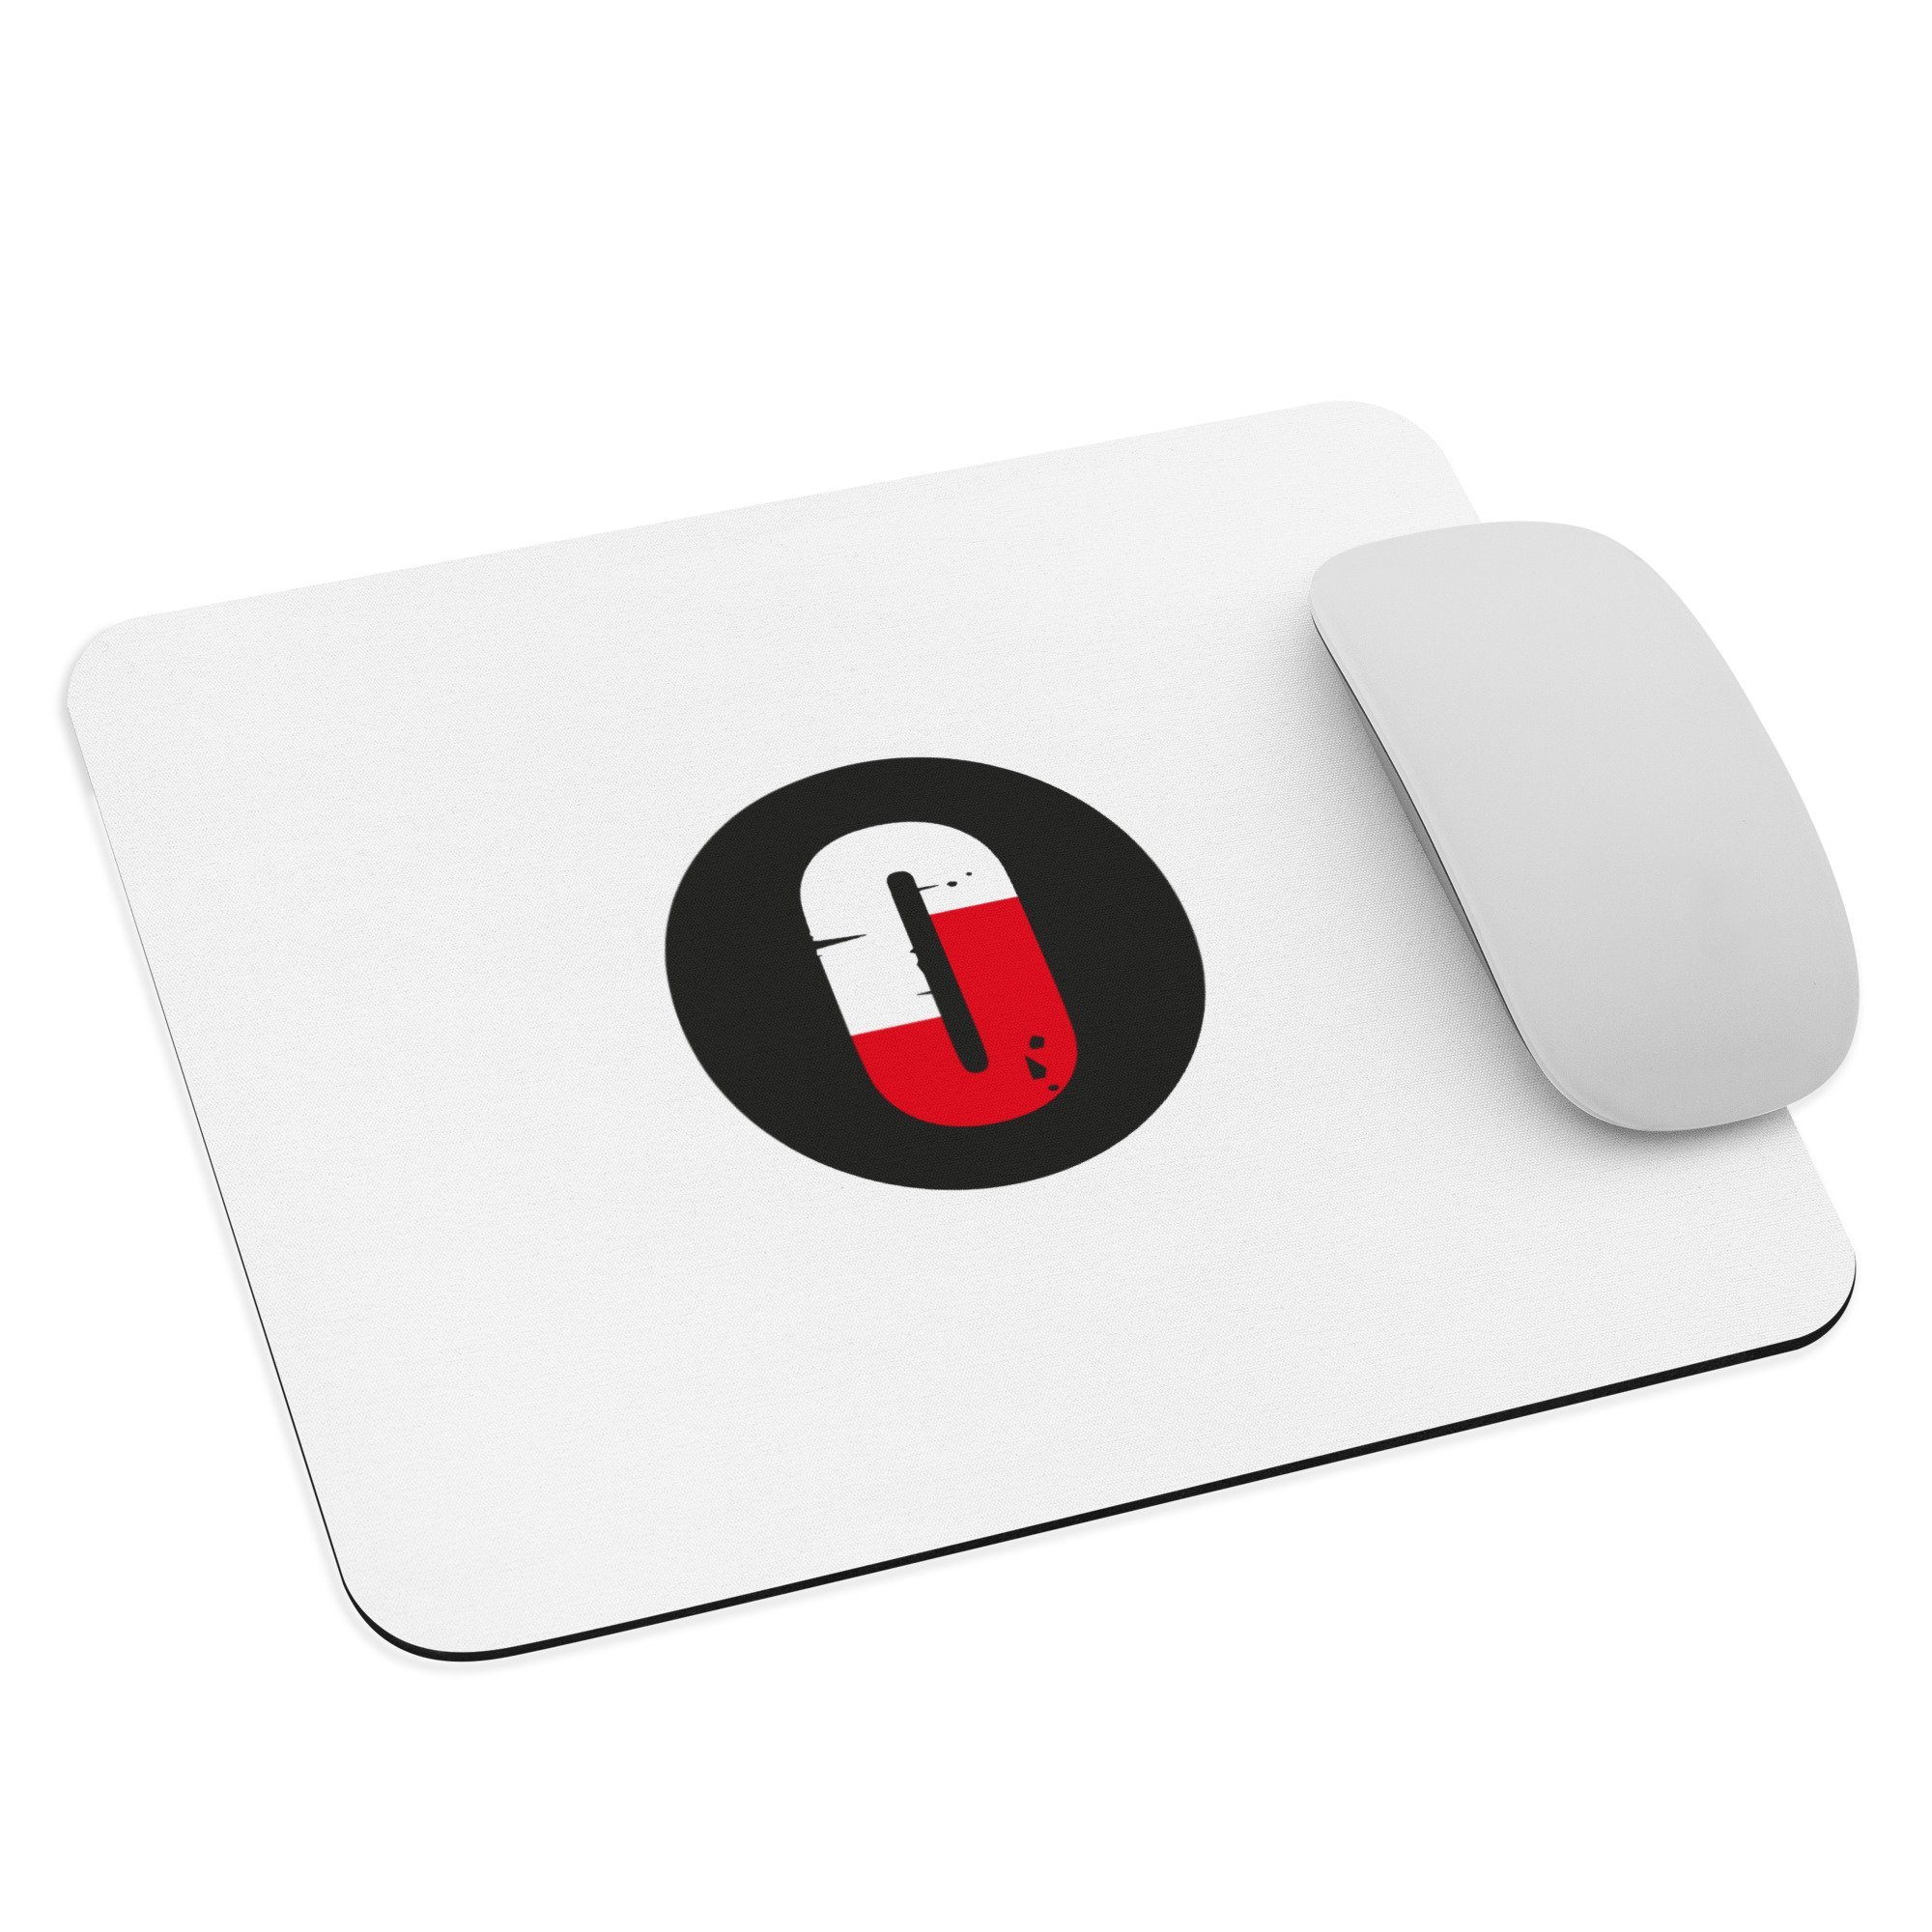 mouse-pad-white-front-6361f31cba80f.jpg